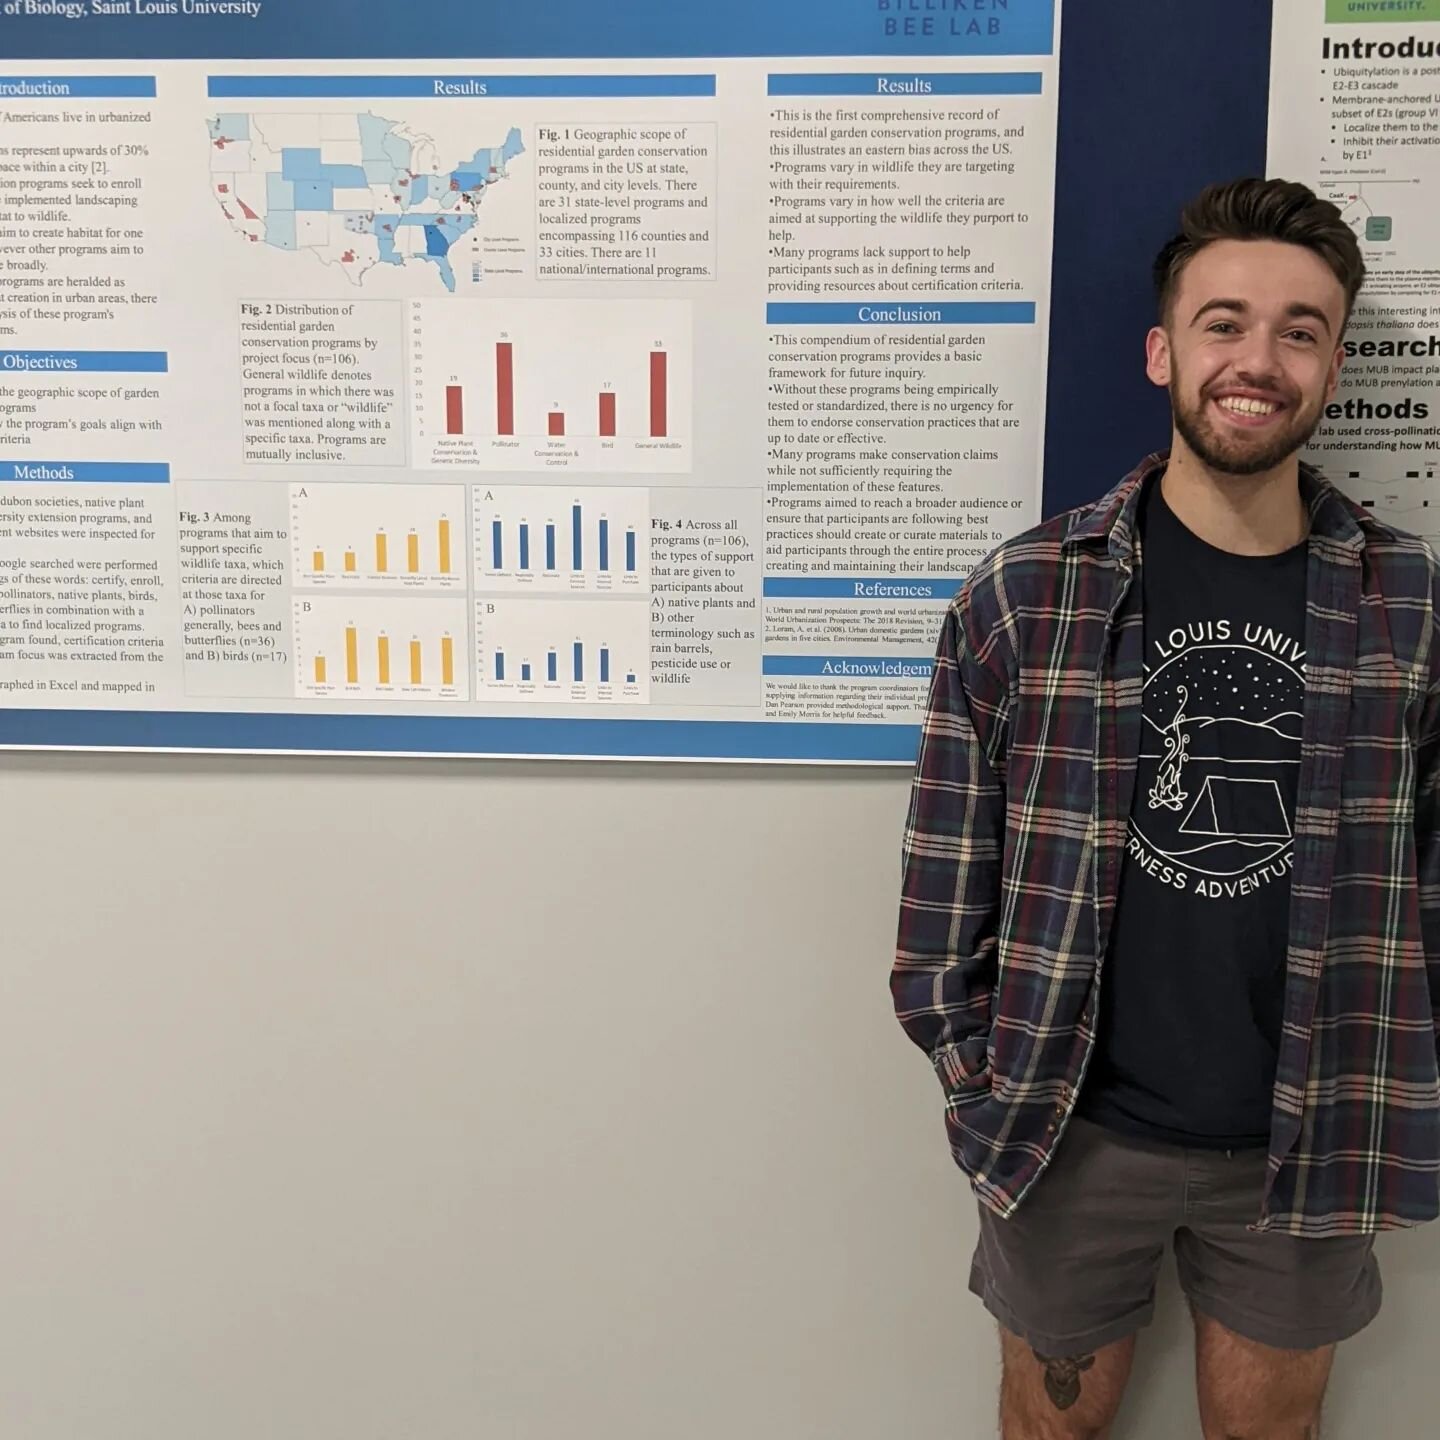 It's undergrad research symposium day! Cody Schrock worked with Nina to put together a poster looking at the different residential garden conservation programs around the country. 
It turned out great! Find him on the second floor of MW today from 2-